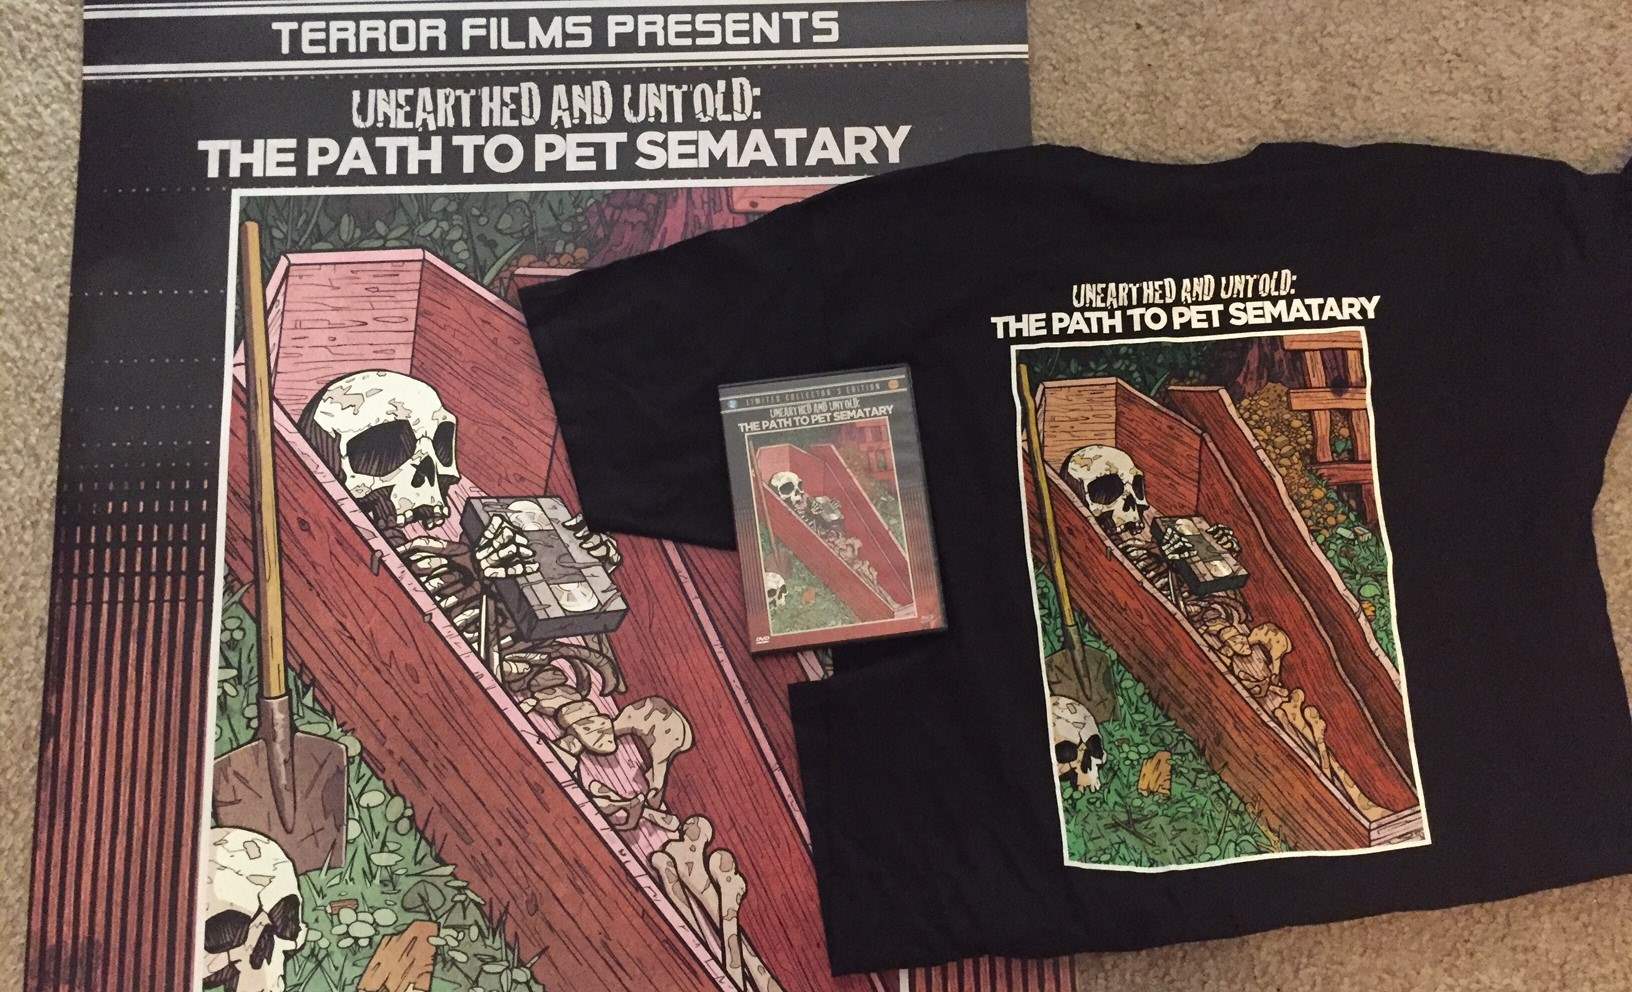 The bundle pack for Unearthed and Untold with DVD/Blu-ray, poster, and t-shirt